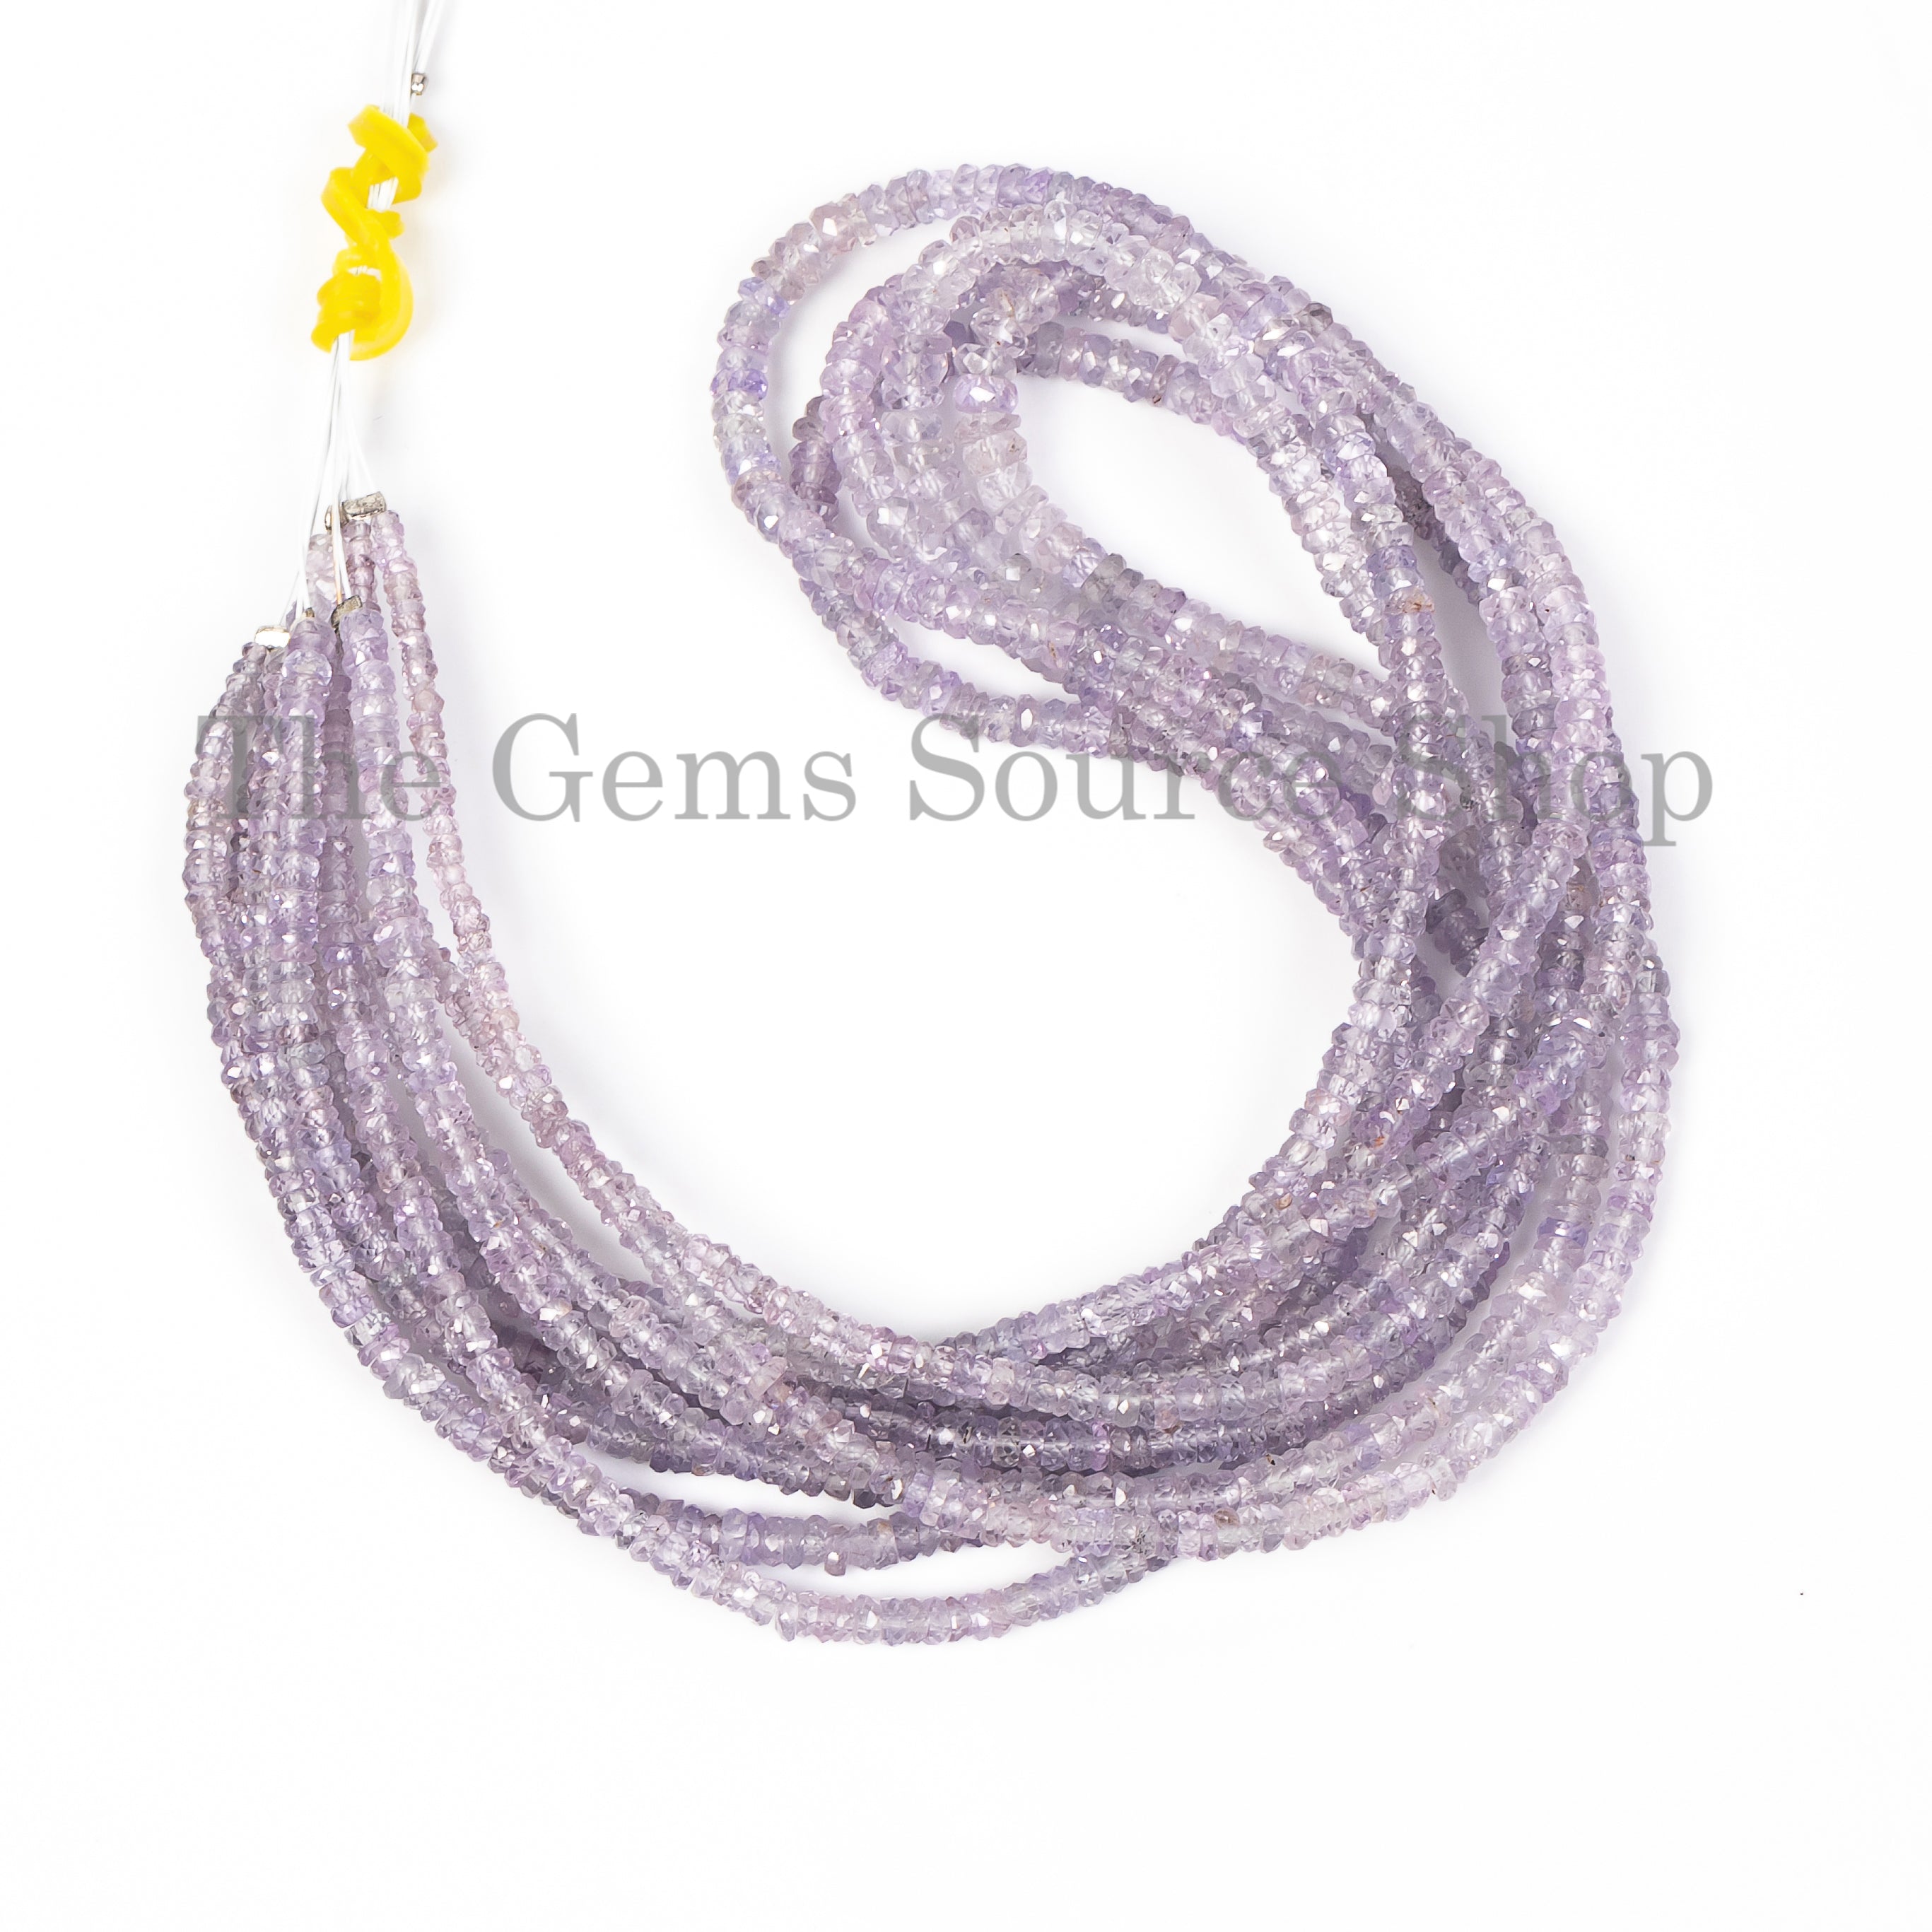 Lavender Sapphire Faceted Rondelle Beads, Natural Precious Gemstone Beads, 2.5-4mm Sapphire Beads, TGS-5060